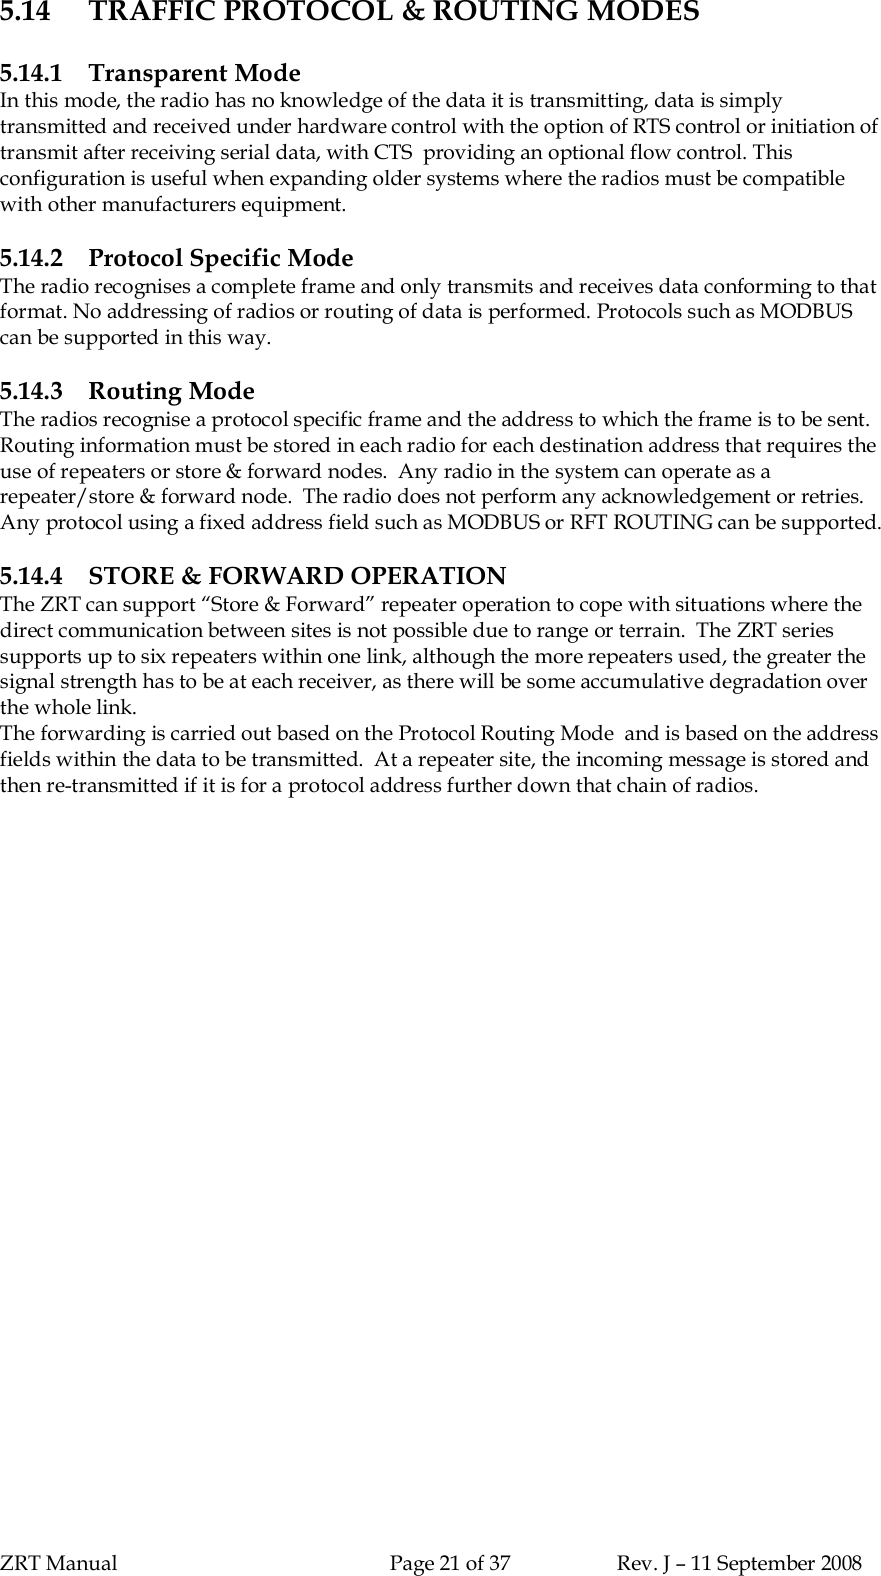 ZRT Manual Page 21 of 37 Rev. J – 11 September 20085.14 TRAFFIC PROTOCOL &amp; ROUTING MODES5.14.1 Transparent ModeIn this mode, the radio has no knowledge of the data it is transmitting, data is simplytransmitted and received under hardware control with the option of RTS control or initiation oftransmit after receiving serial data, with CTS  providing an optional flow control. Thisconfiguration is useful when expanding older systems where the radios must be compatiblewith other manufacturers equipment.5.14.2 Protocol Specific ModeThe radio recognises a complete frame and only transmits and receives data conforming to thatformat. No addressing of radios or routing of data is performed. Protocols such as MODBUScan be supported in this way.5.14.3 Routing ModeThe radios recognise a protocol specific frame and the address to which the frame is to be sent.Routing information must be stored in each radio for each destination address that requires theuse of repeaters or store &amp; forward nodes.  Any radio in the system can operate as arepeater/store &amp; forward node.  The radio does not perform any acknowledgement or retries.Any protocol using a fixed address field such as MODBUS or RFT ROUTING can be supported.5.14.4 STORE &amp; FORWARD OPERATIONThe ZRT can support “Store &amp; Forward” repeater operation to cope with situations where thedirect communication between sites is not possible due to range or terrain.  The ZRT seriessupports up to six repeaters within one link, although the more repeaters used, the greater thesignal strength has to be at each receiver, as there will be some accumulative degradation overthe whole link.The forwarding is carried out based on the Protocol Routing Mode  and is based on the addressfields within the data to be transmitted.  At a repeater site, the incoming message is stored andthen re-transmitted if it is for a protocol address further down that chain of radios.